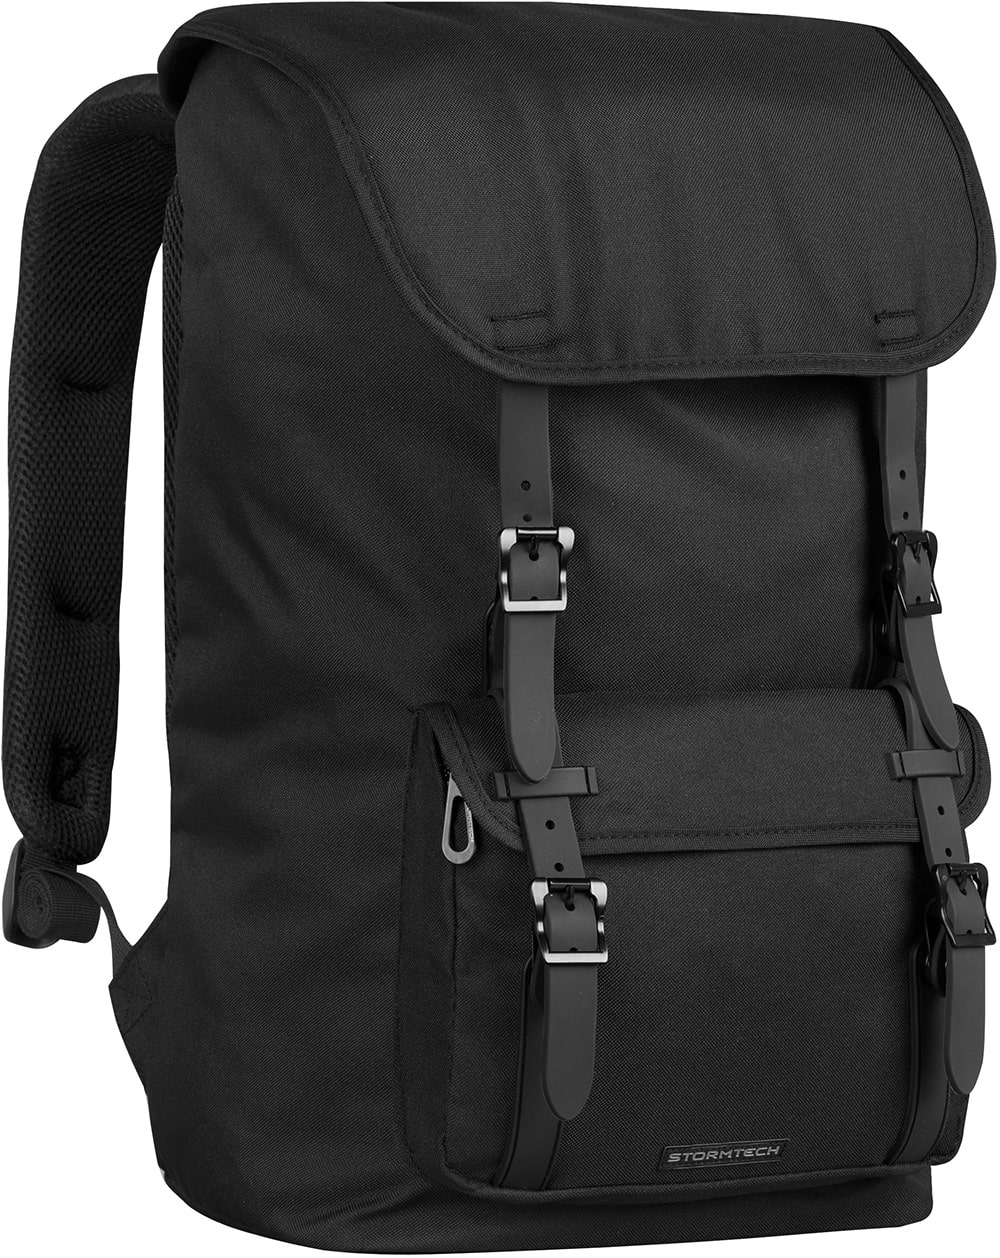 Picture of Stormtech Oasis Backpack